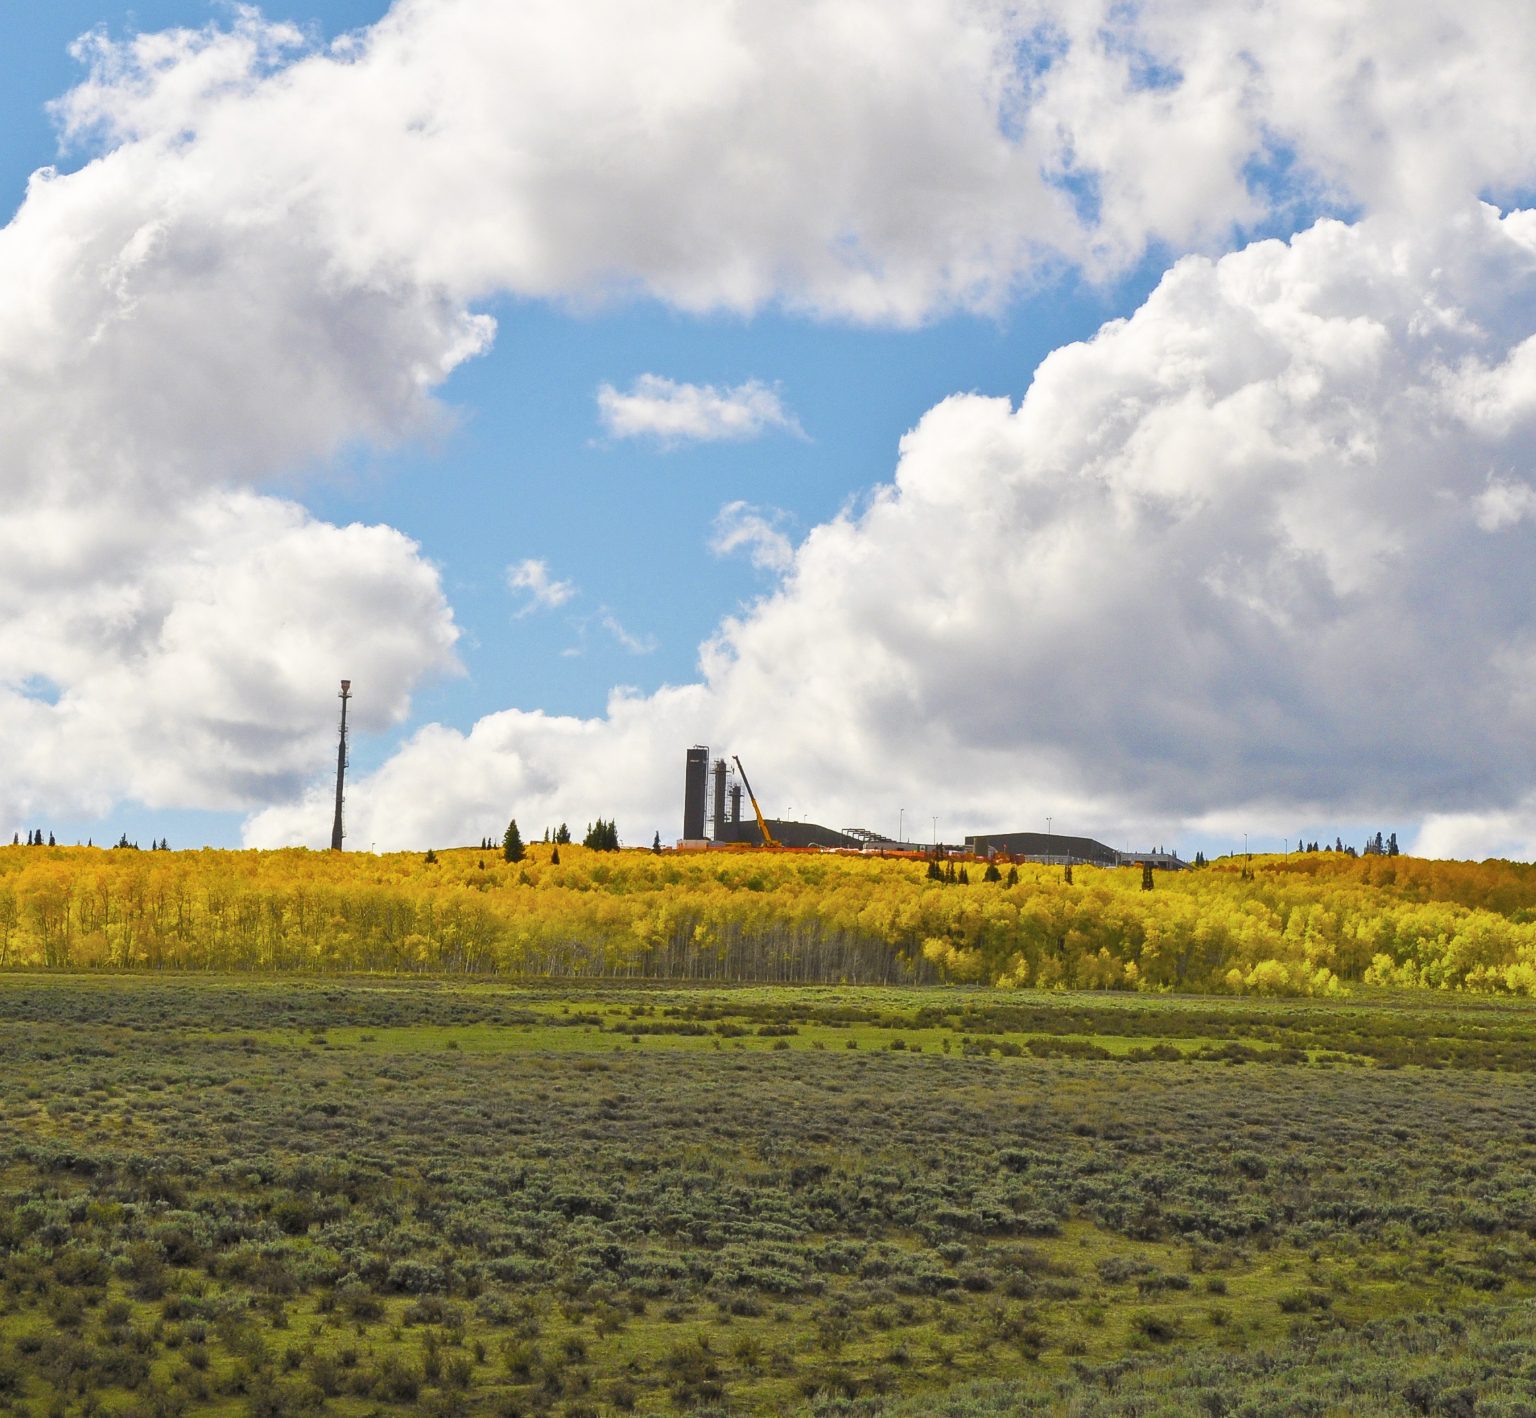 A green landscape with operations in the distance, under a blue sky.